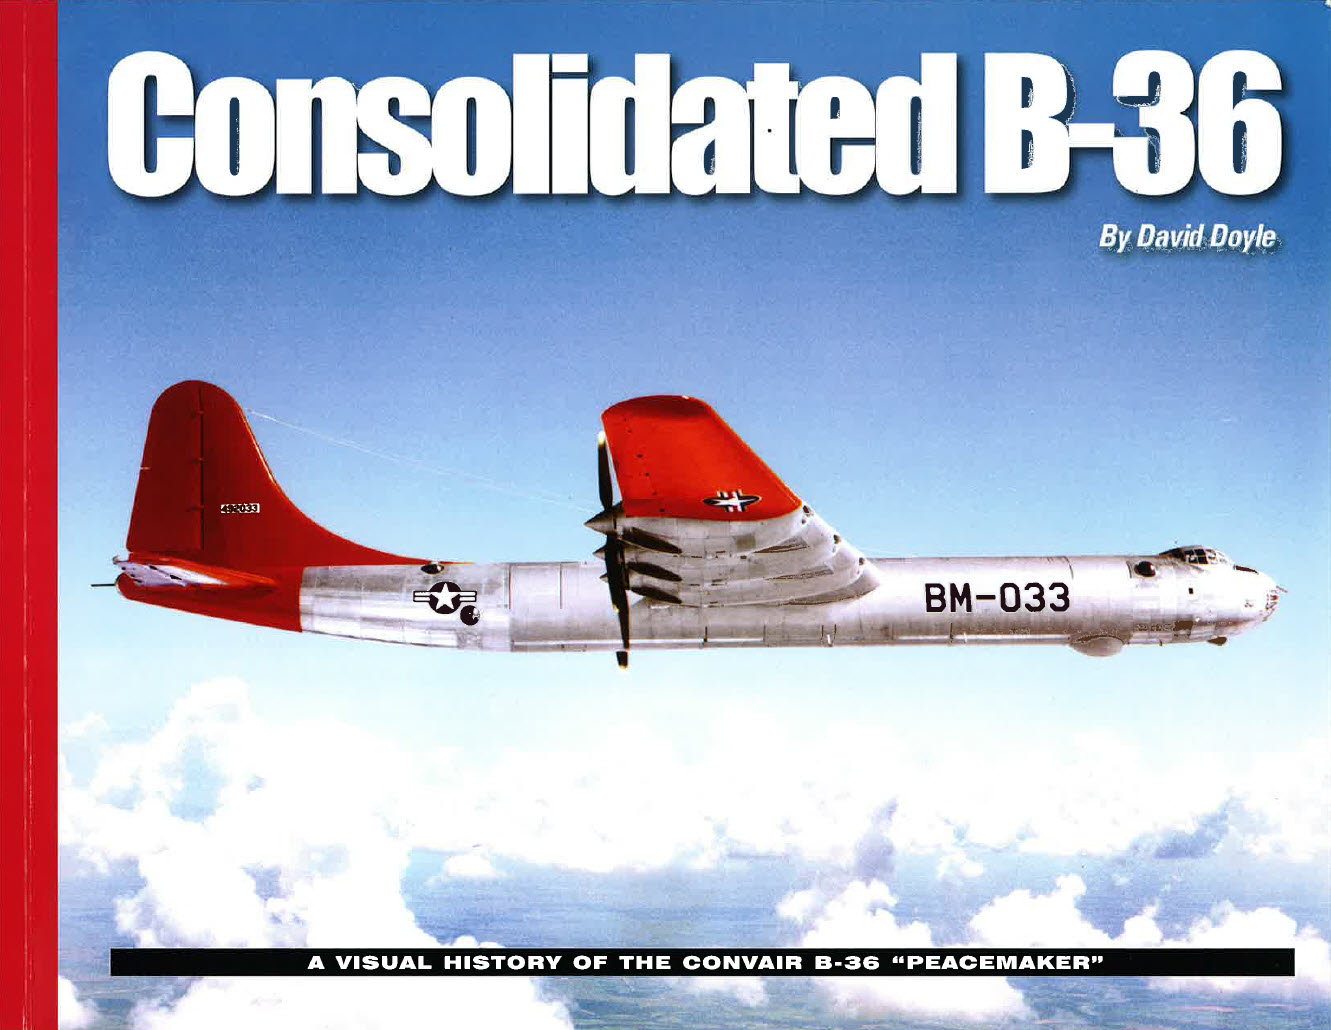 Convair B-36 Peacemaker history, development, specifications, production,  deployment, scrapping, survivors and photographs